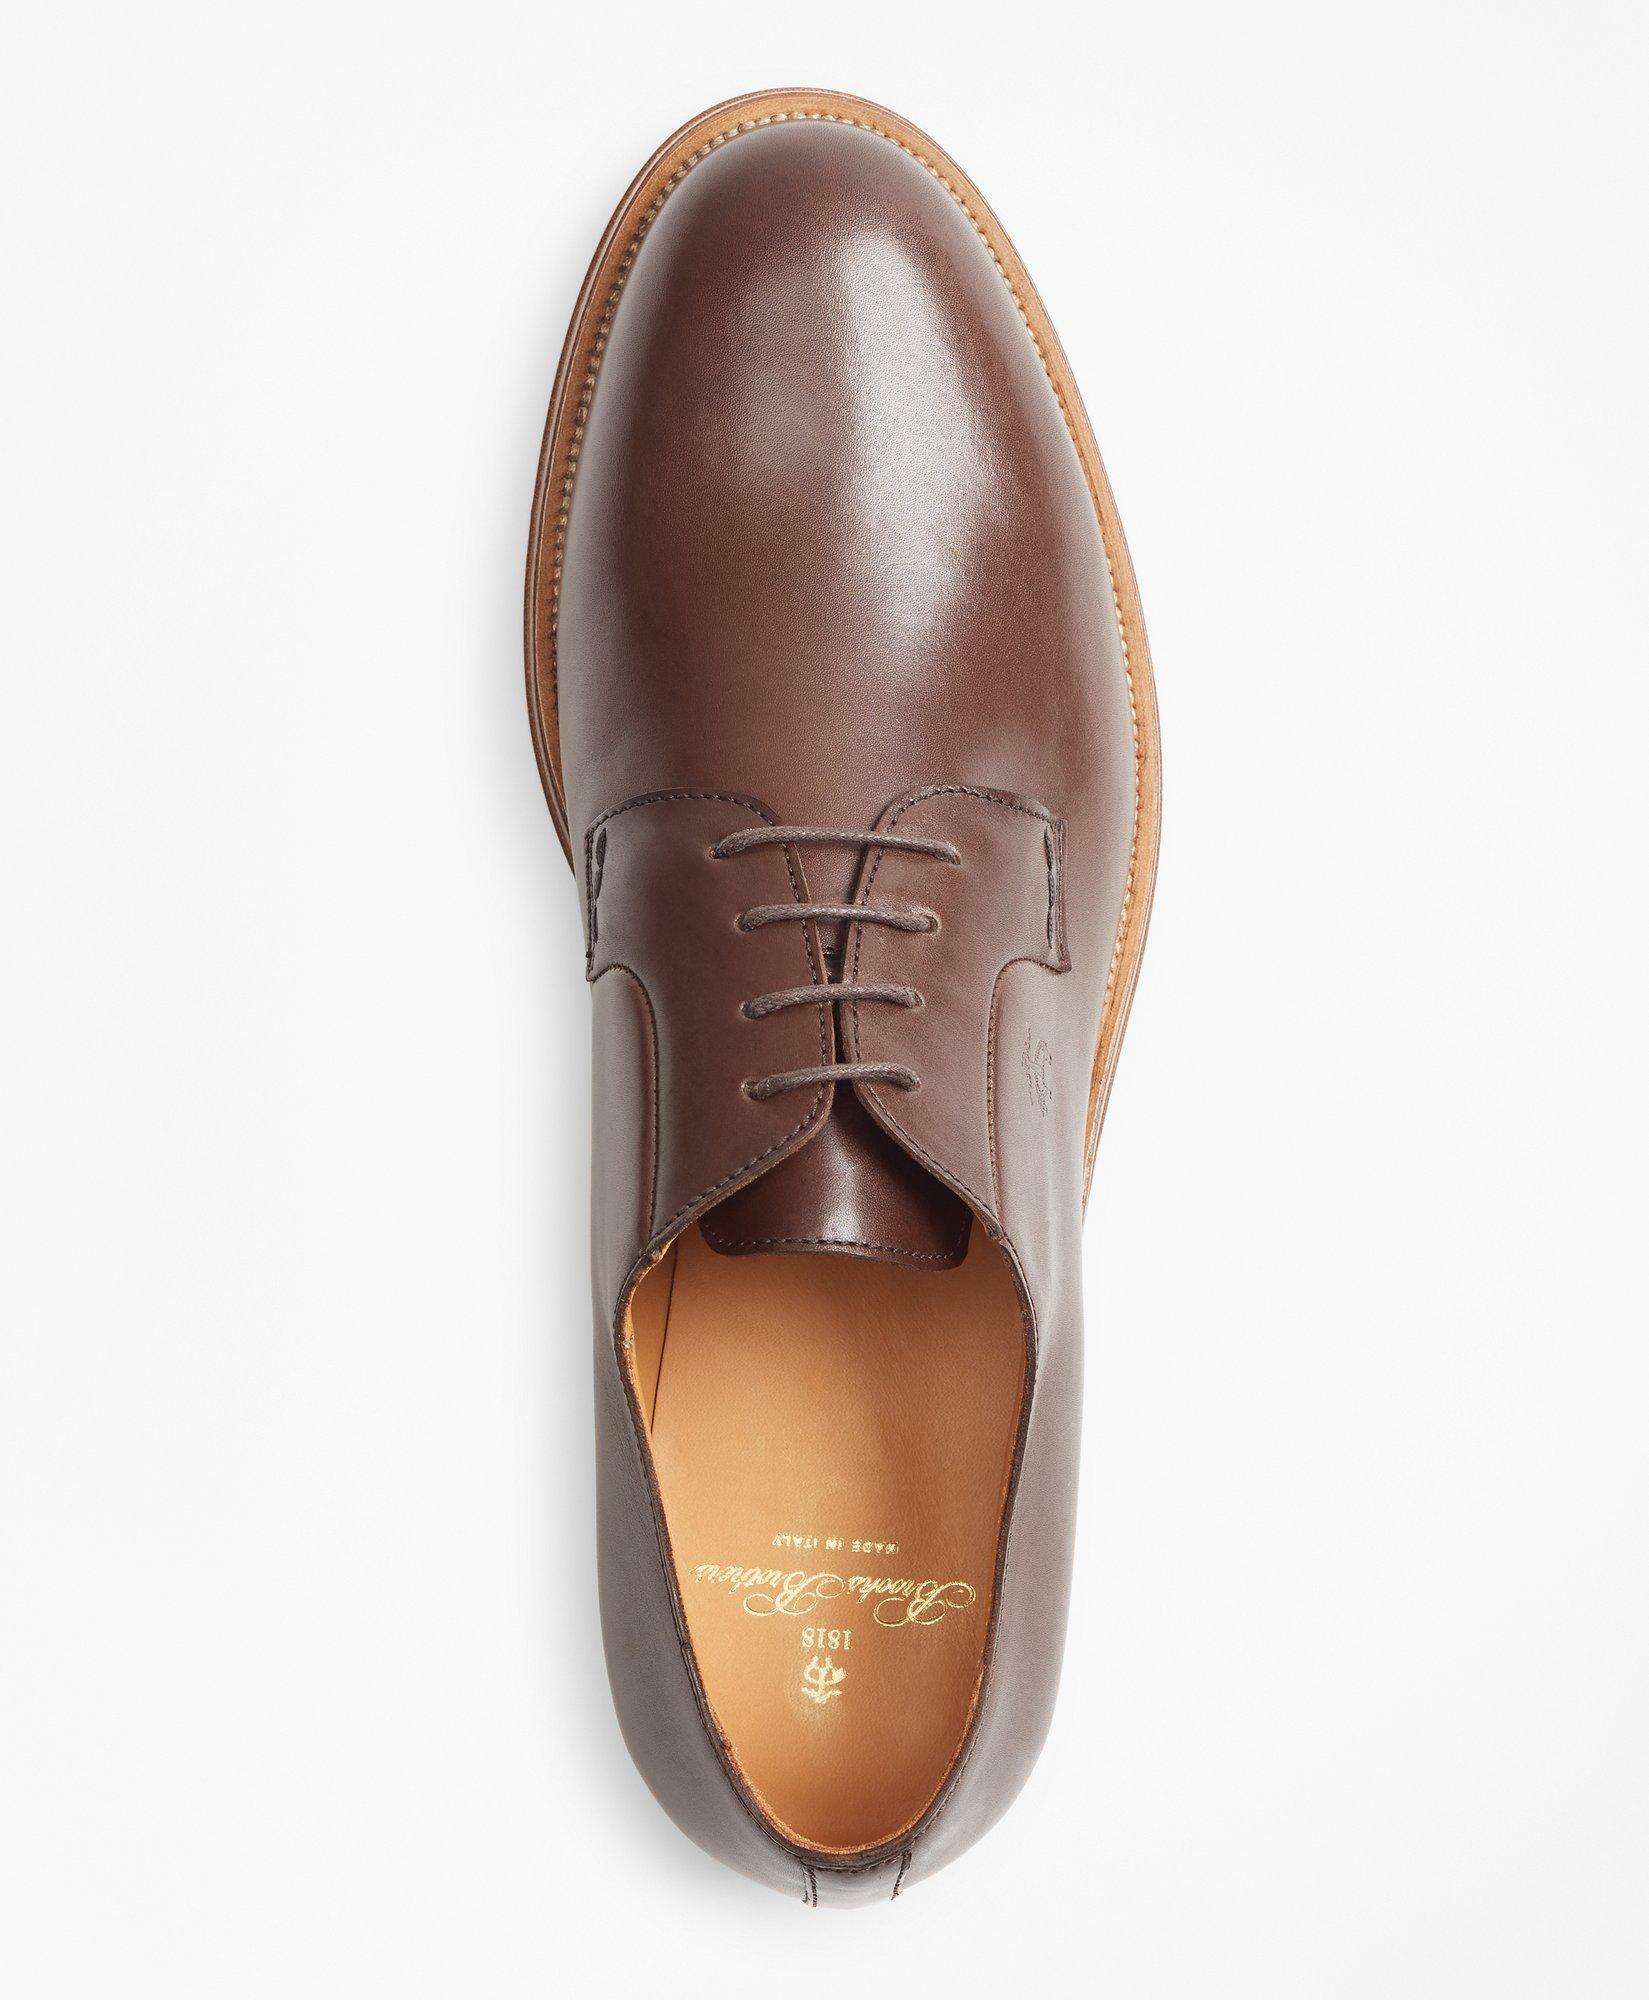 Brooks Brothers Men's Leather Lace-Up Shoes | Dark Brown